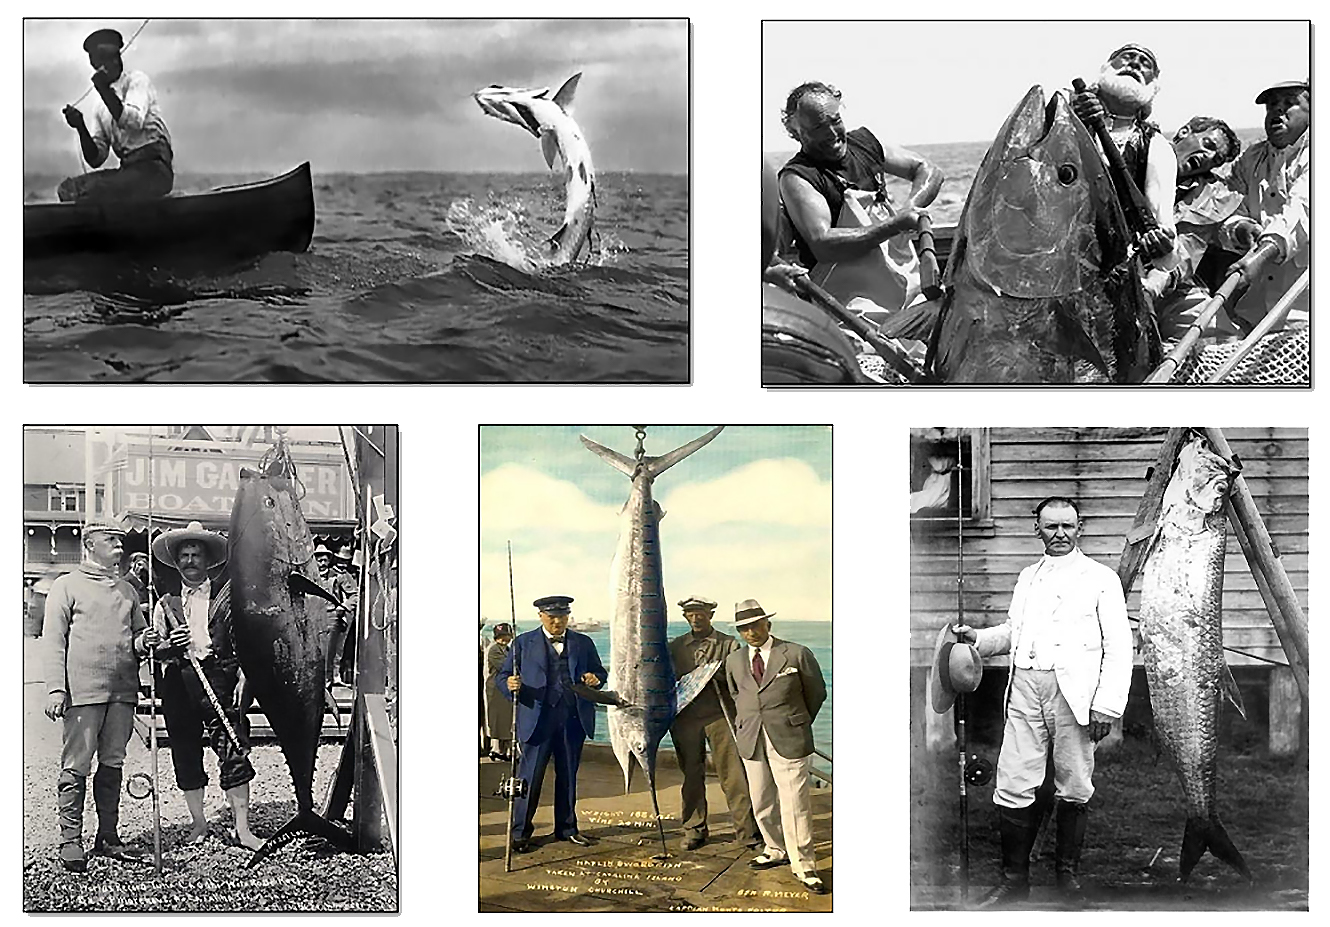 2A-HISTORY OF SPORTFISHING, Ch 2 pics only